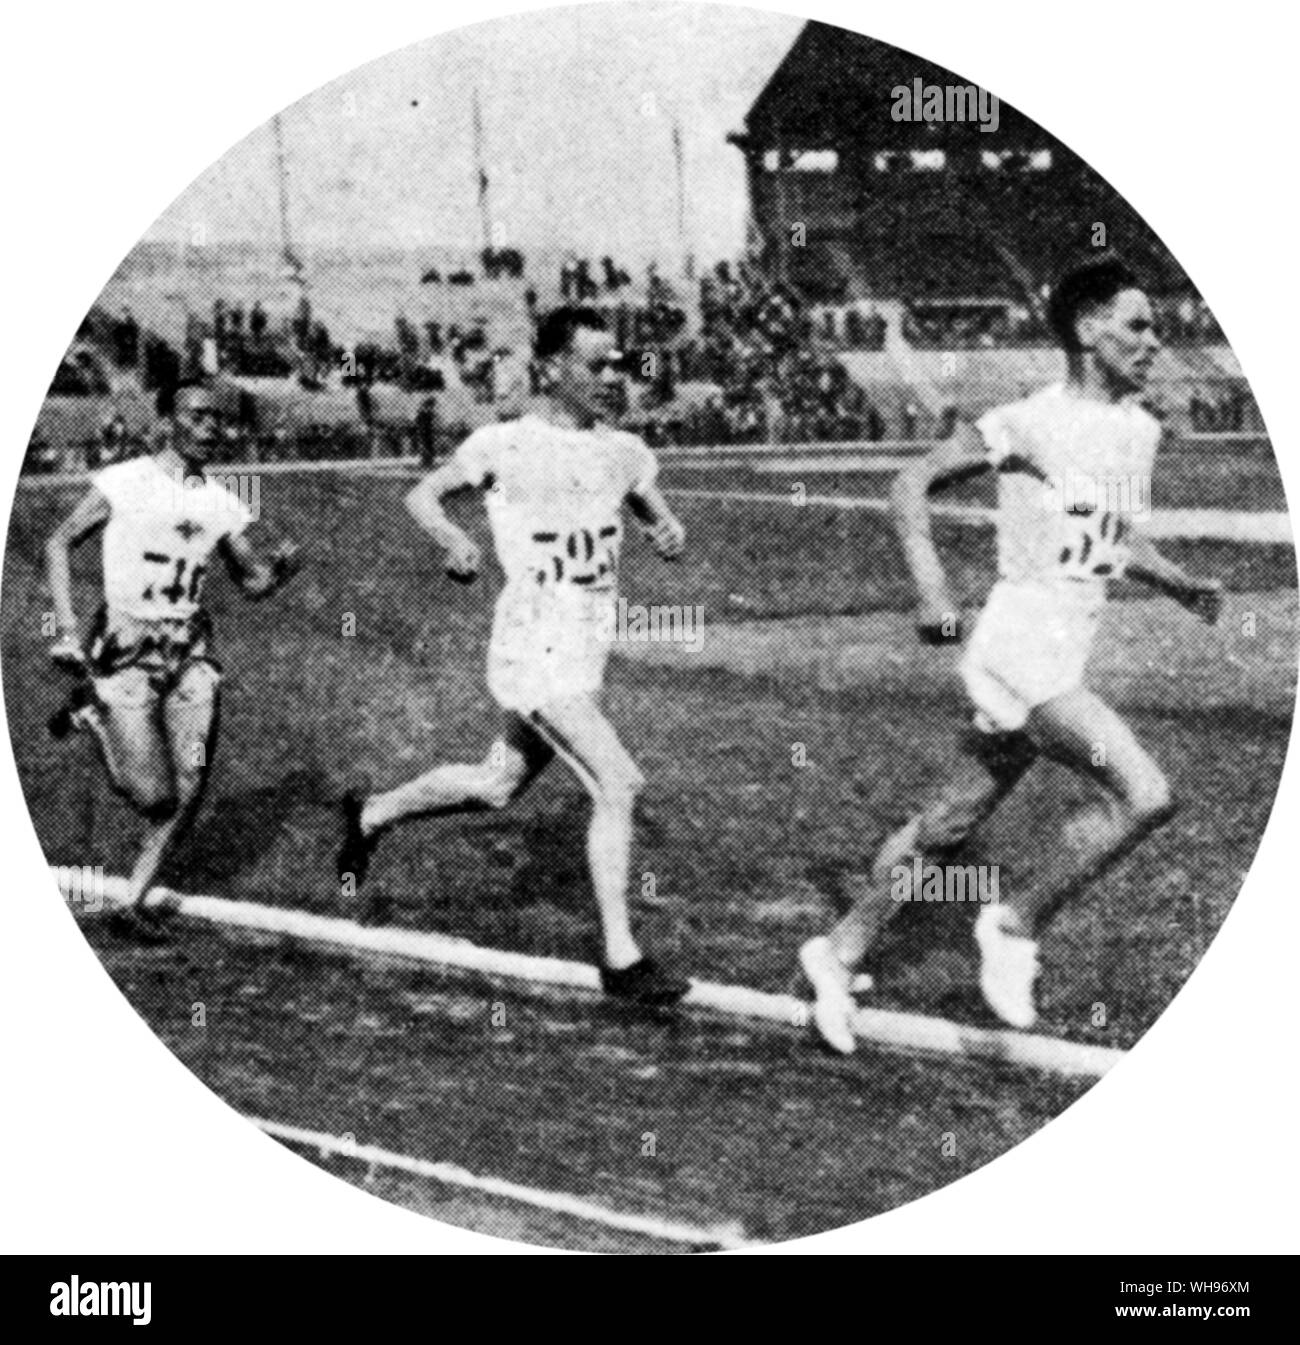 France, Paris Olympics, 1924: Men's 5000 metres final. Ritola takes the lead followed by Nurmi and Wide.. Stock Photo